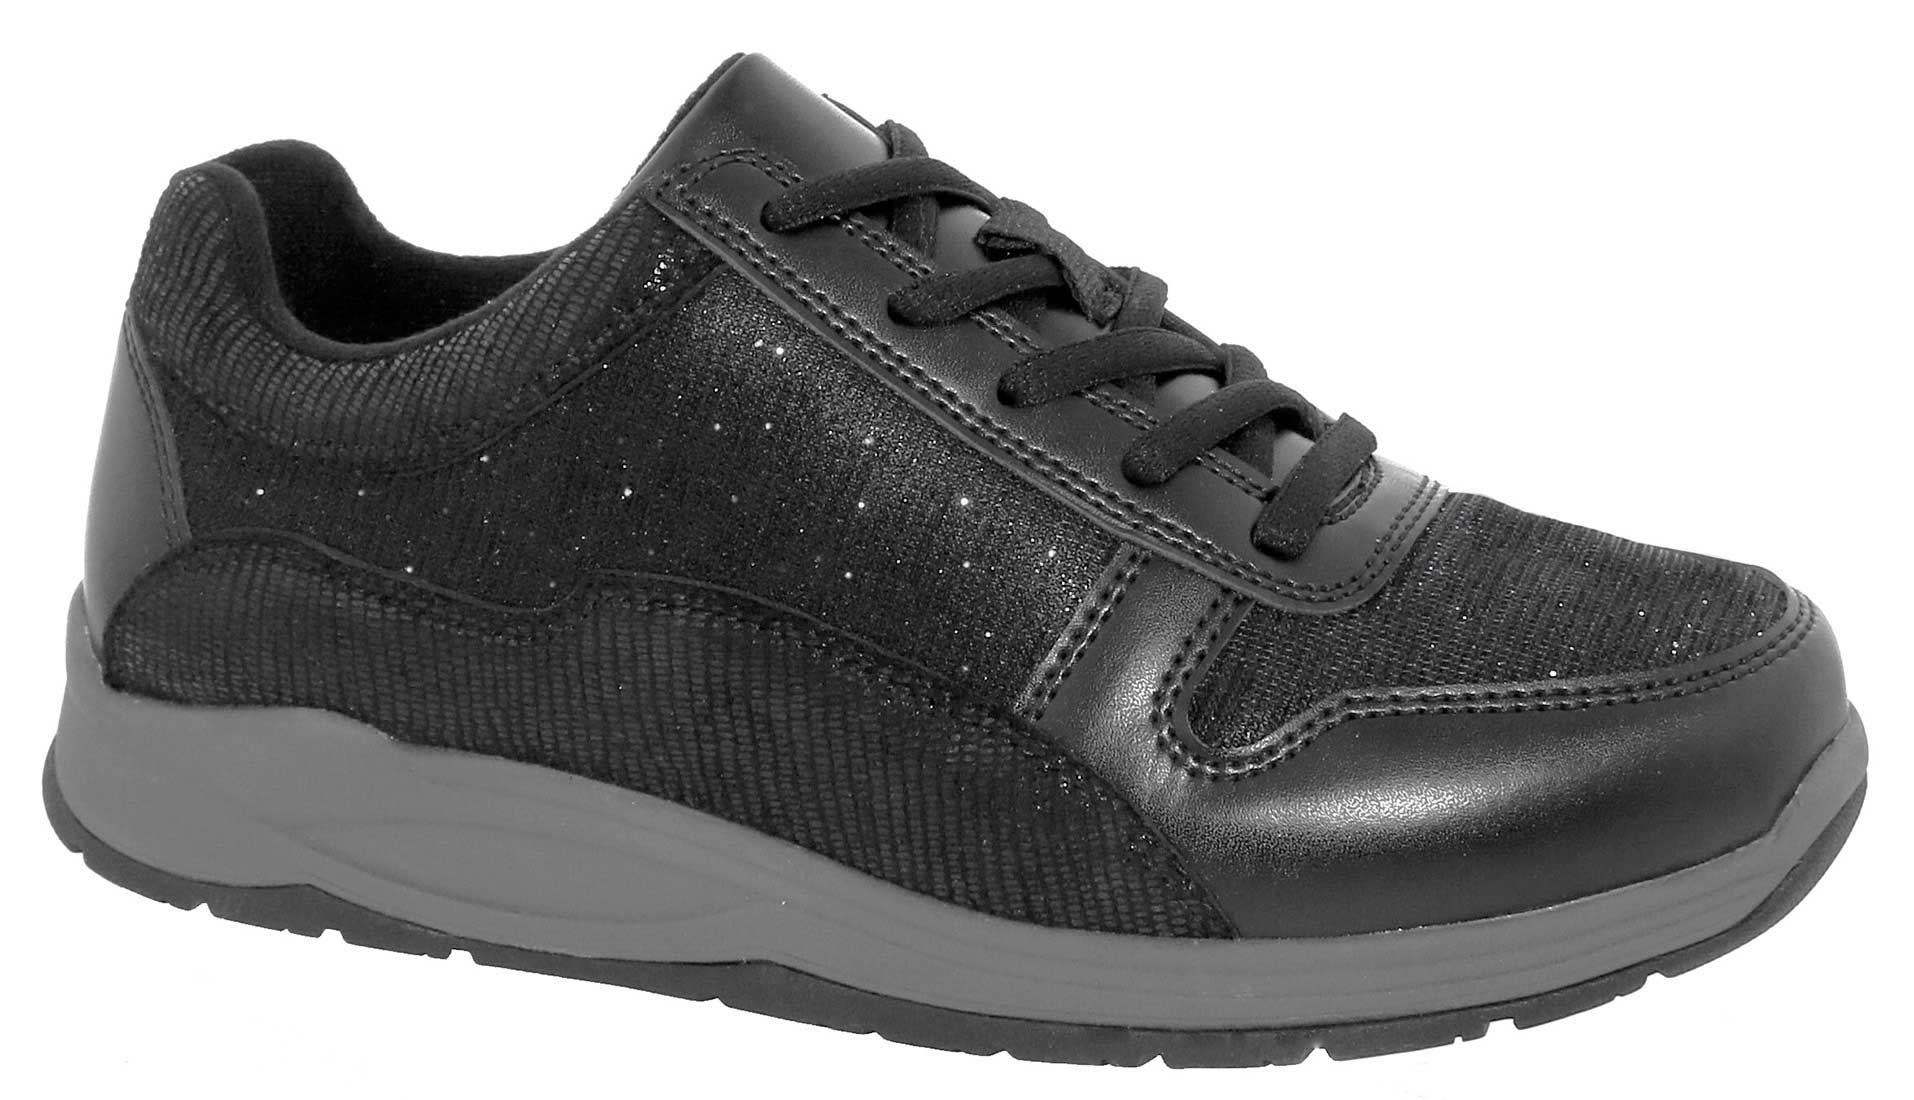 Footsaver Shoes Rummy 80555 - Women's Casual Comfort Therapeutic Diabetic Shoe - Extra Depth For Orthotics